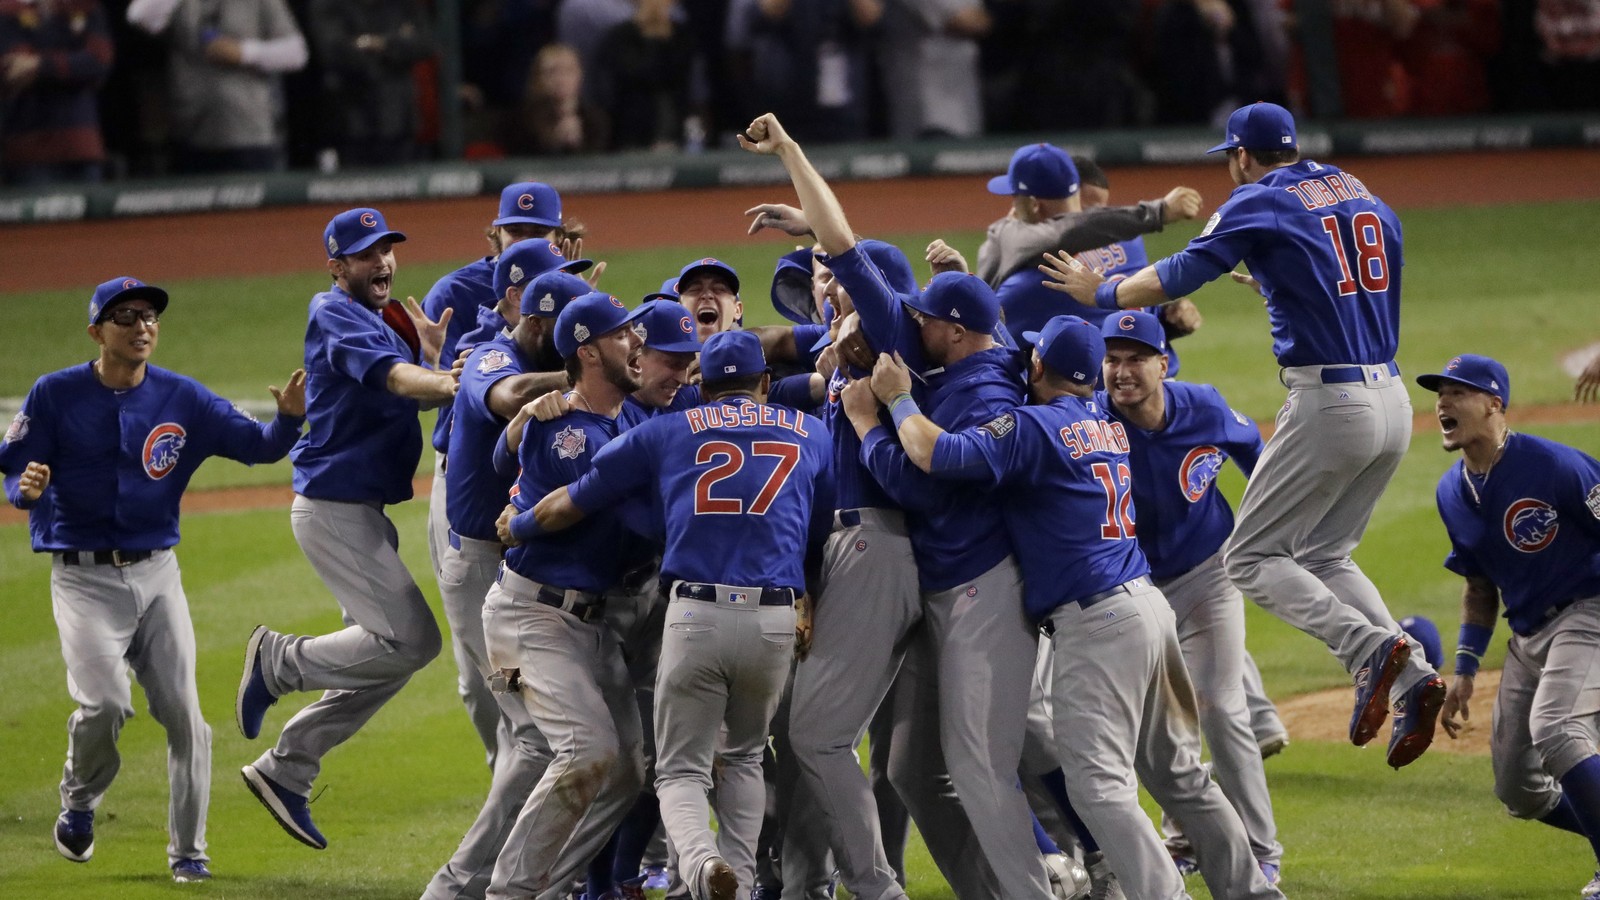 The Heartbreak and Joy of Being a Lifelong Cubs Fan - The Atlantic